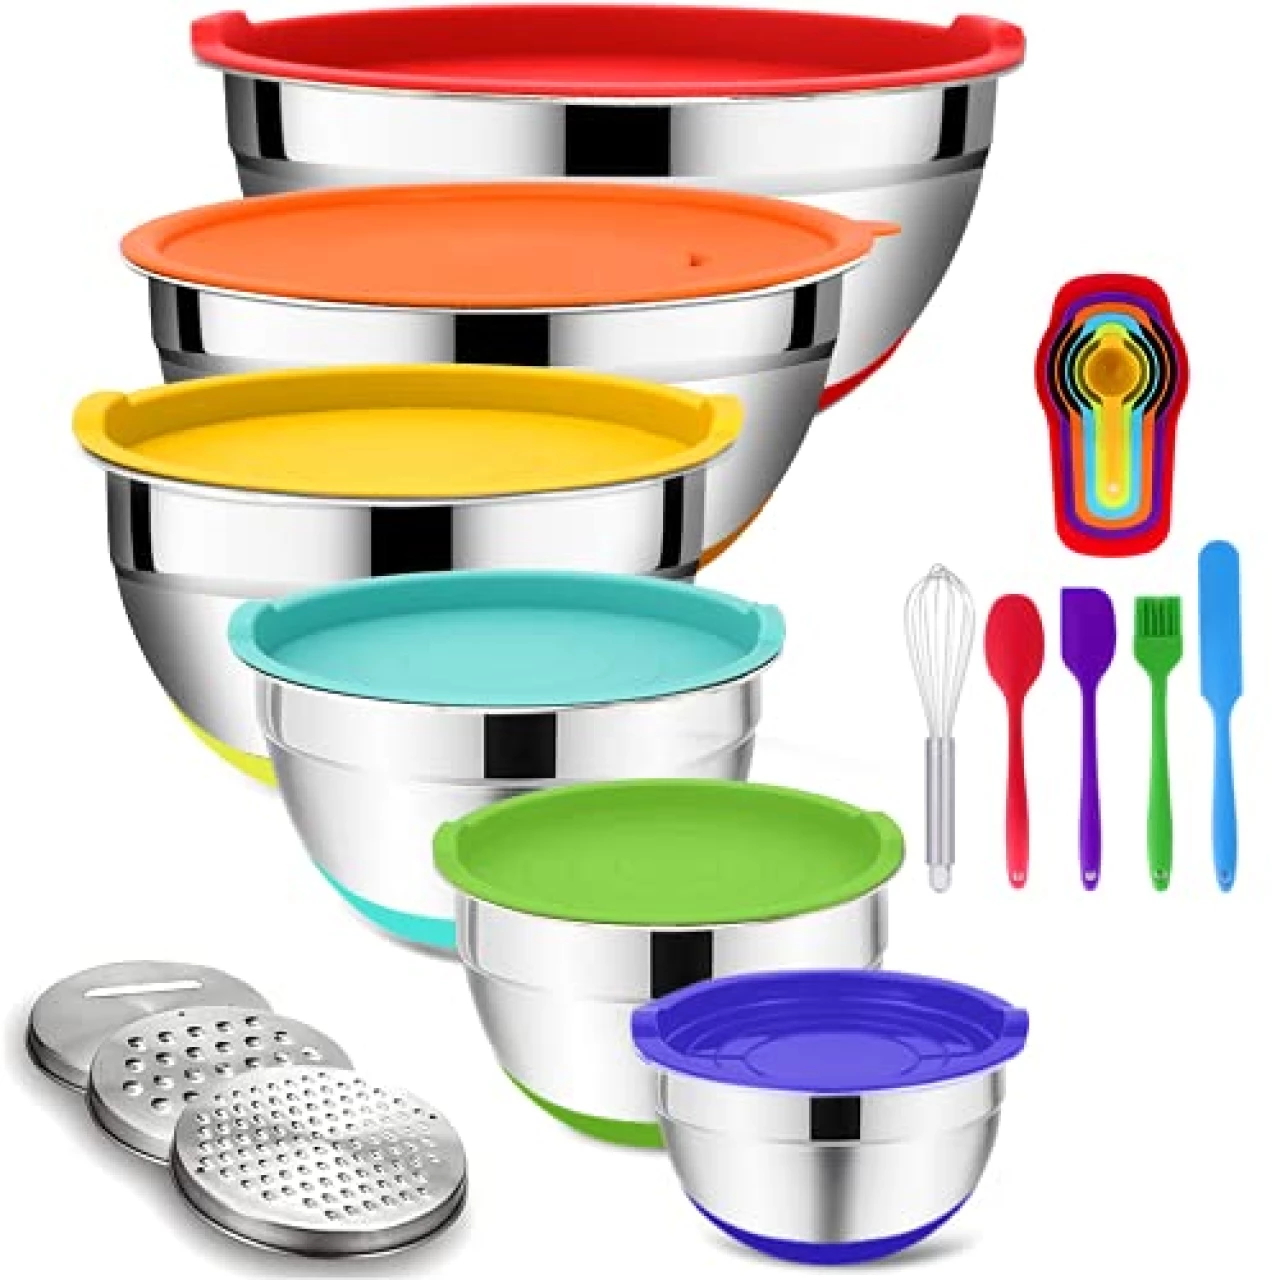 Mixing Bowls with Airtight Lids, 20PCS Stainless Steel Set